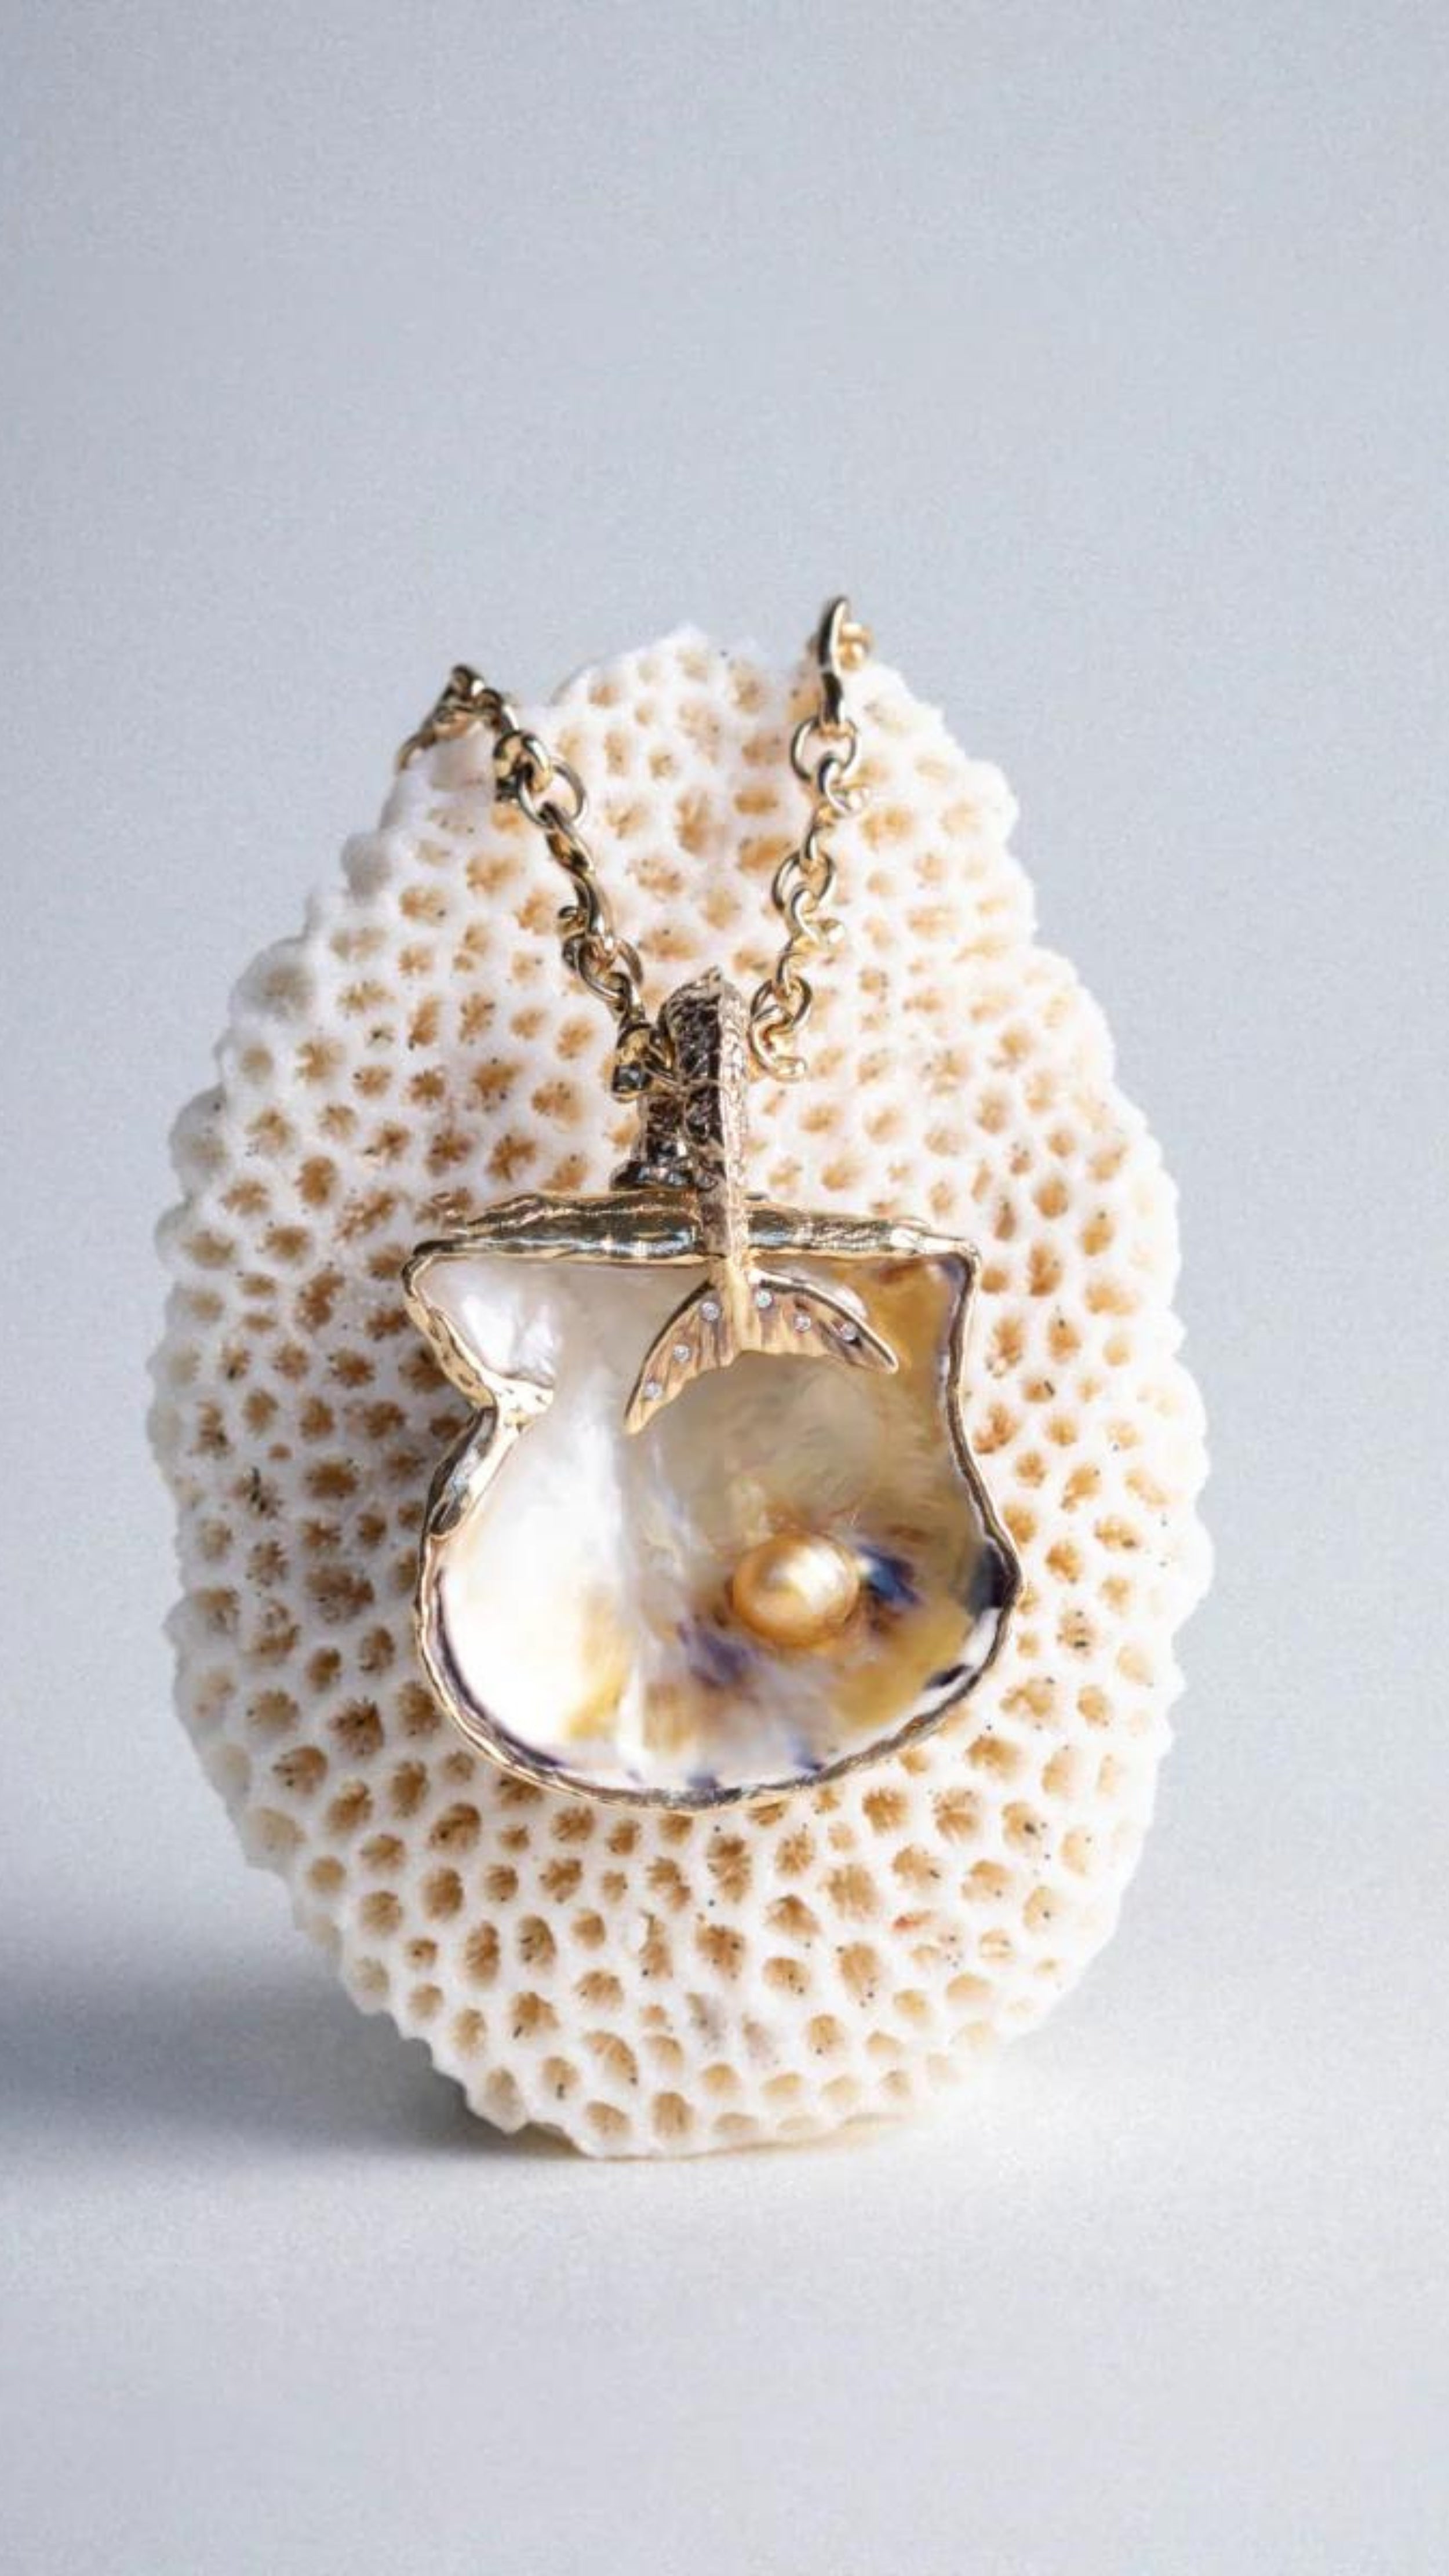 Bibi van der Velden Lagoon Shell Pendant with Wave Chain. 18k yellow gold shell shaped pendant showcases an iridescent pipe pearl for a shimmering effect. With a white diamond and a cream pearl on the interior and a wave chain crafted from 18k yellow gold.